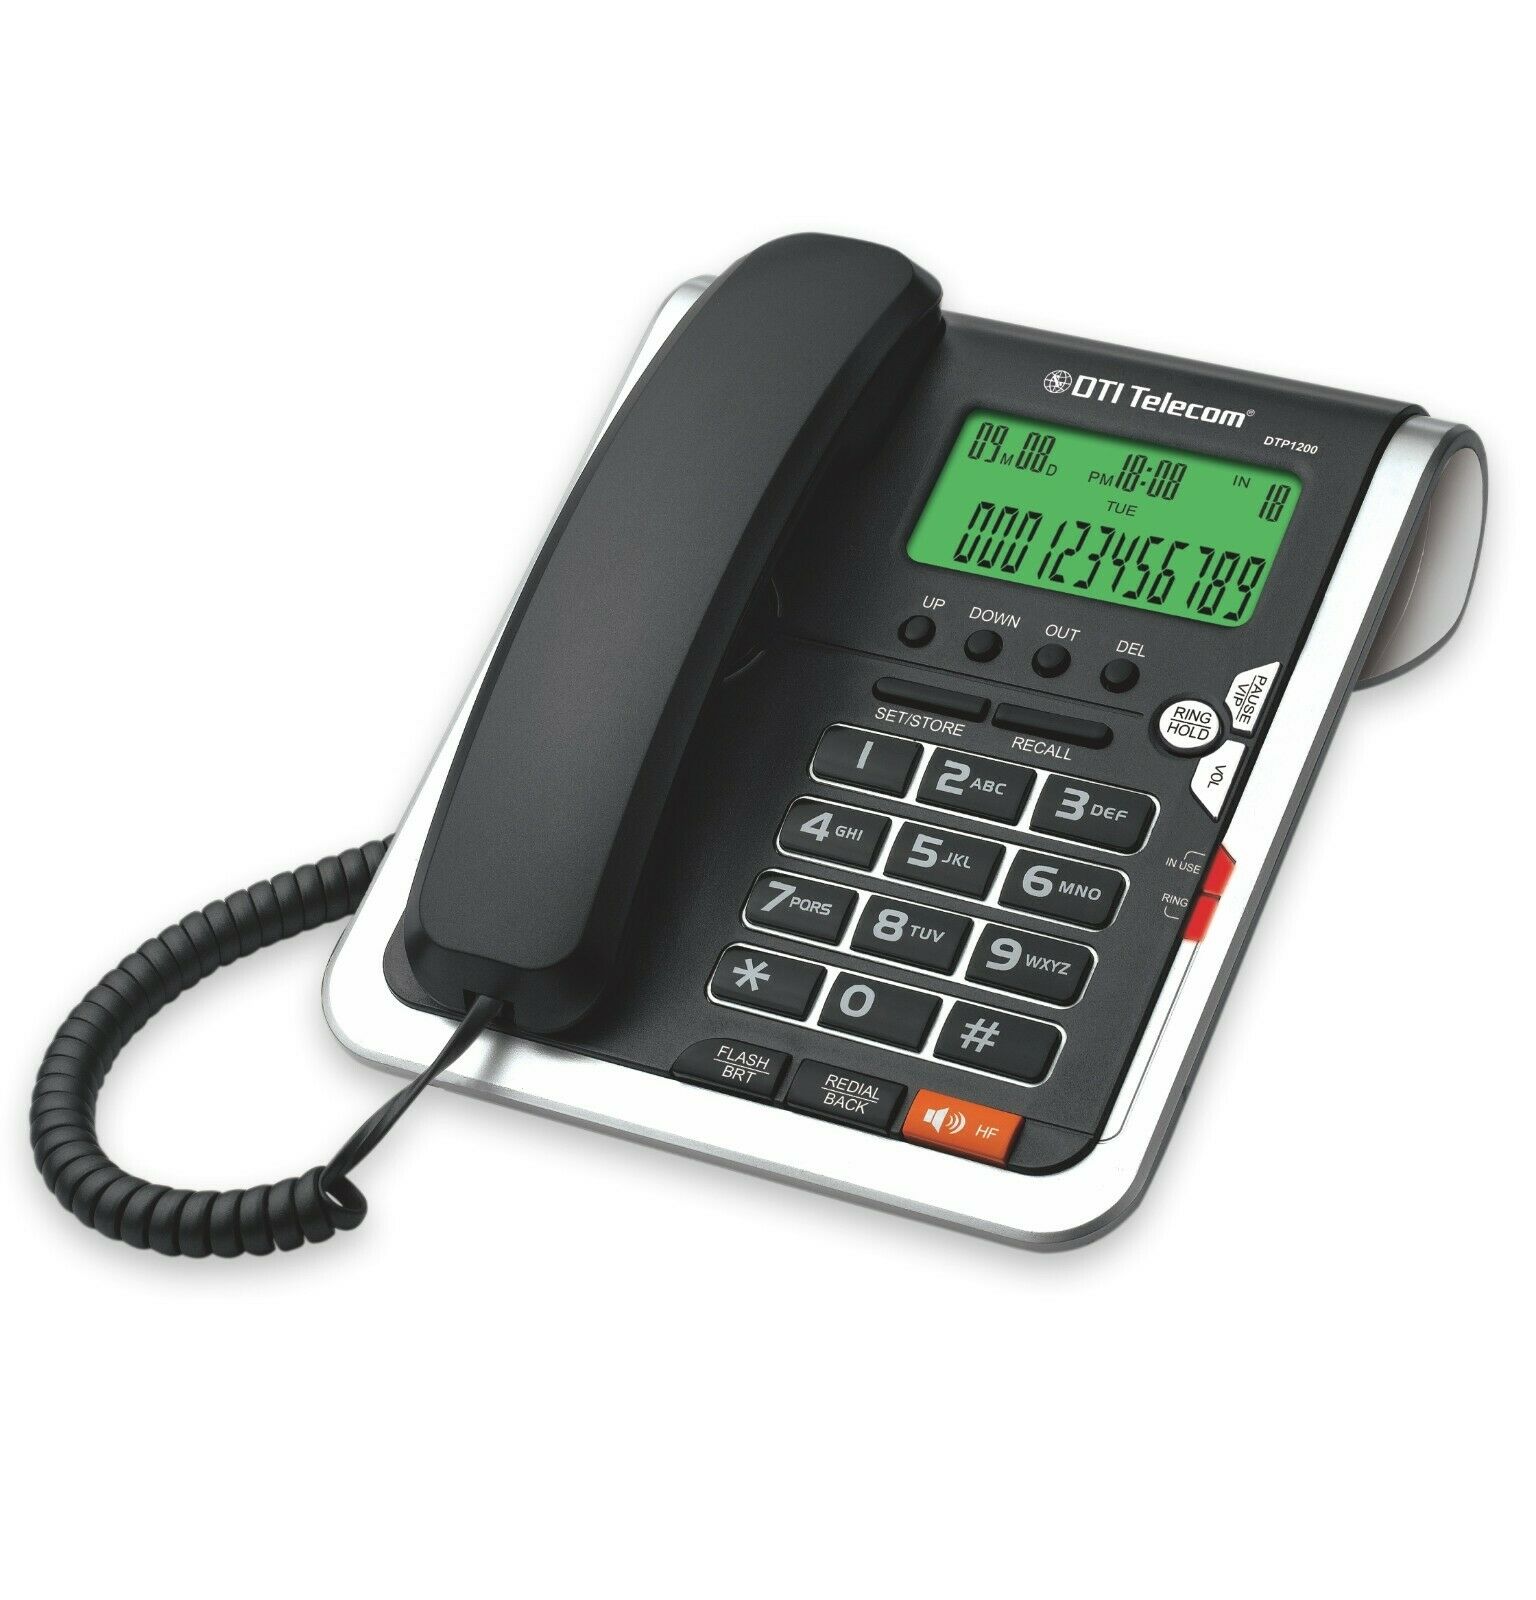 Big Button Caller Id Phone For Wall Or Office Desk With Speakerphone And Memory